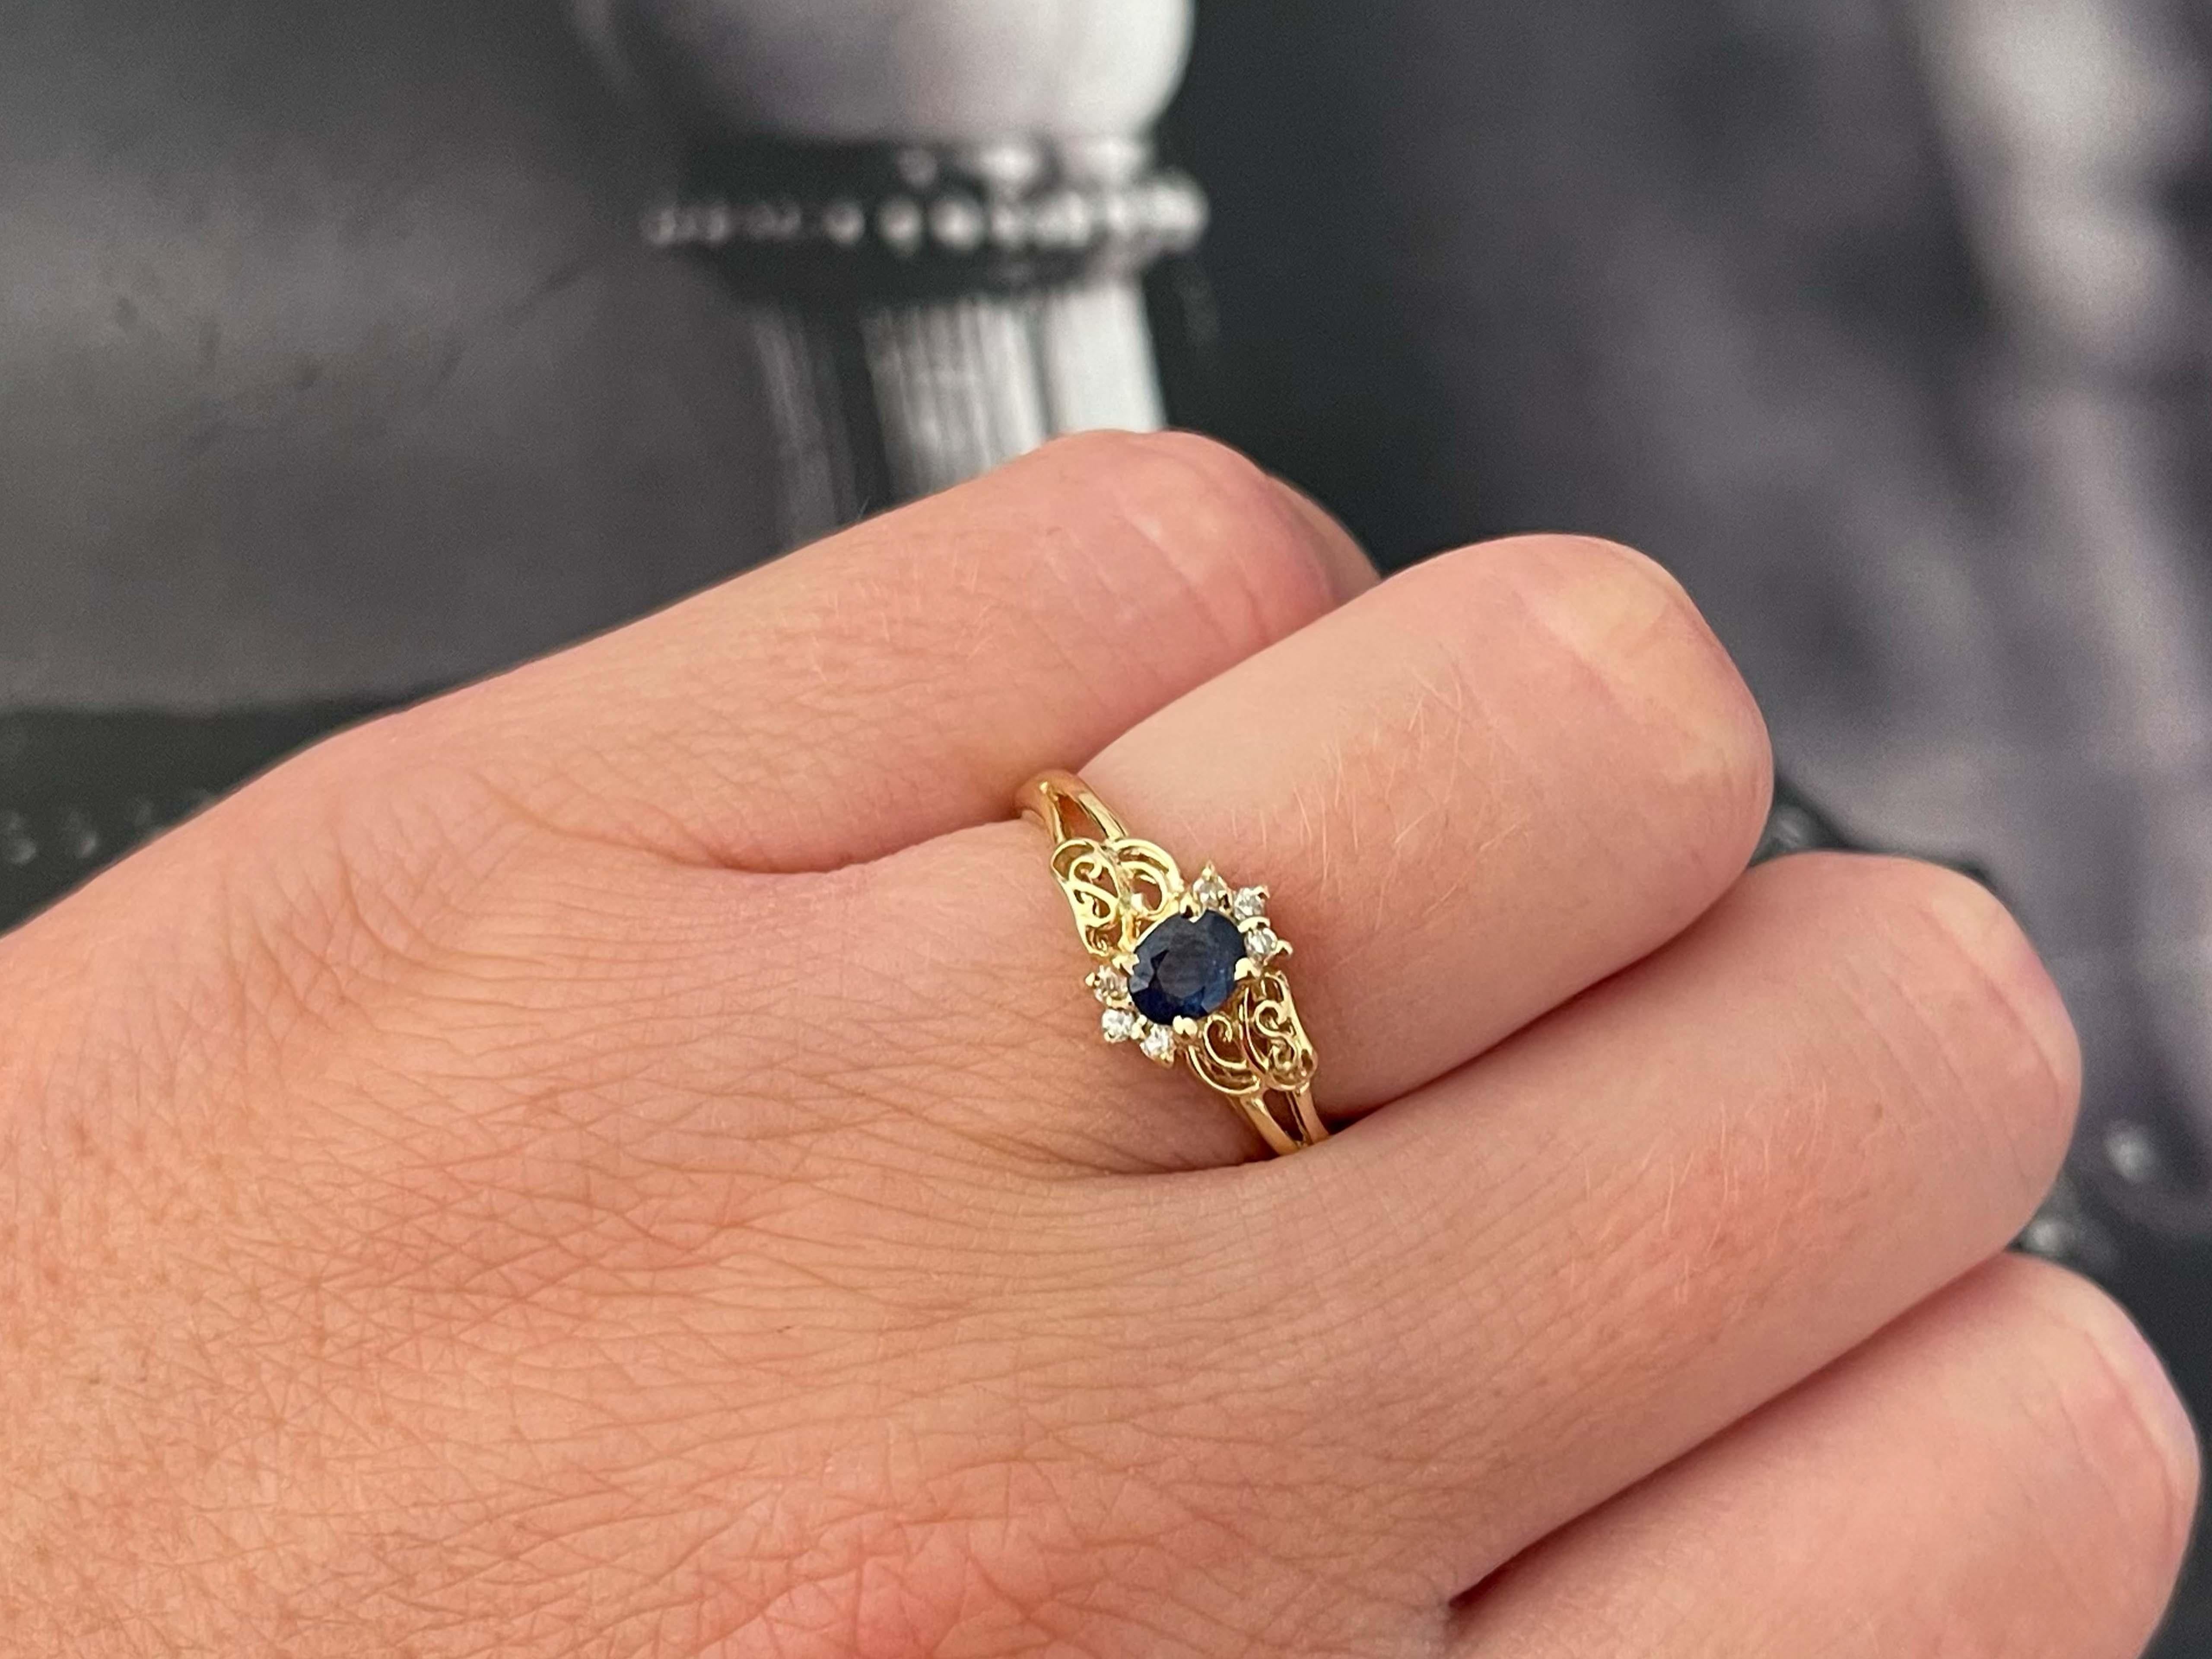 Item Specifications:

Metal: 14K Yellow Gold

Style: Statement Ring

Ring Size: 6.5 (resizing available for a fee)

Total Weight: 2.1 Grams

Ring Height: 8.8 mm

Gemstone Specifications:

Gemstone: 1 blue sapphire

Shape: oval

Sapphire